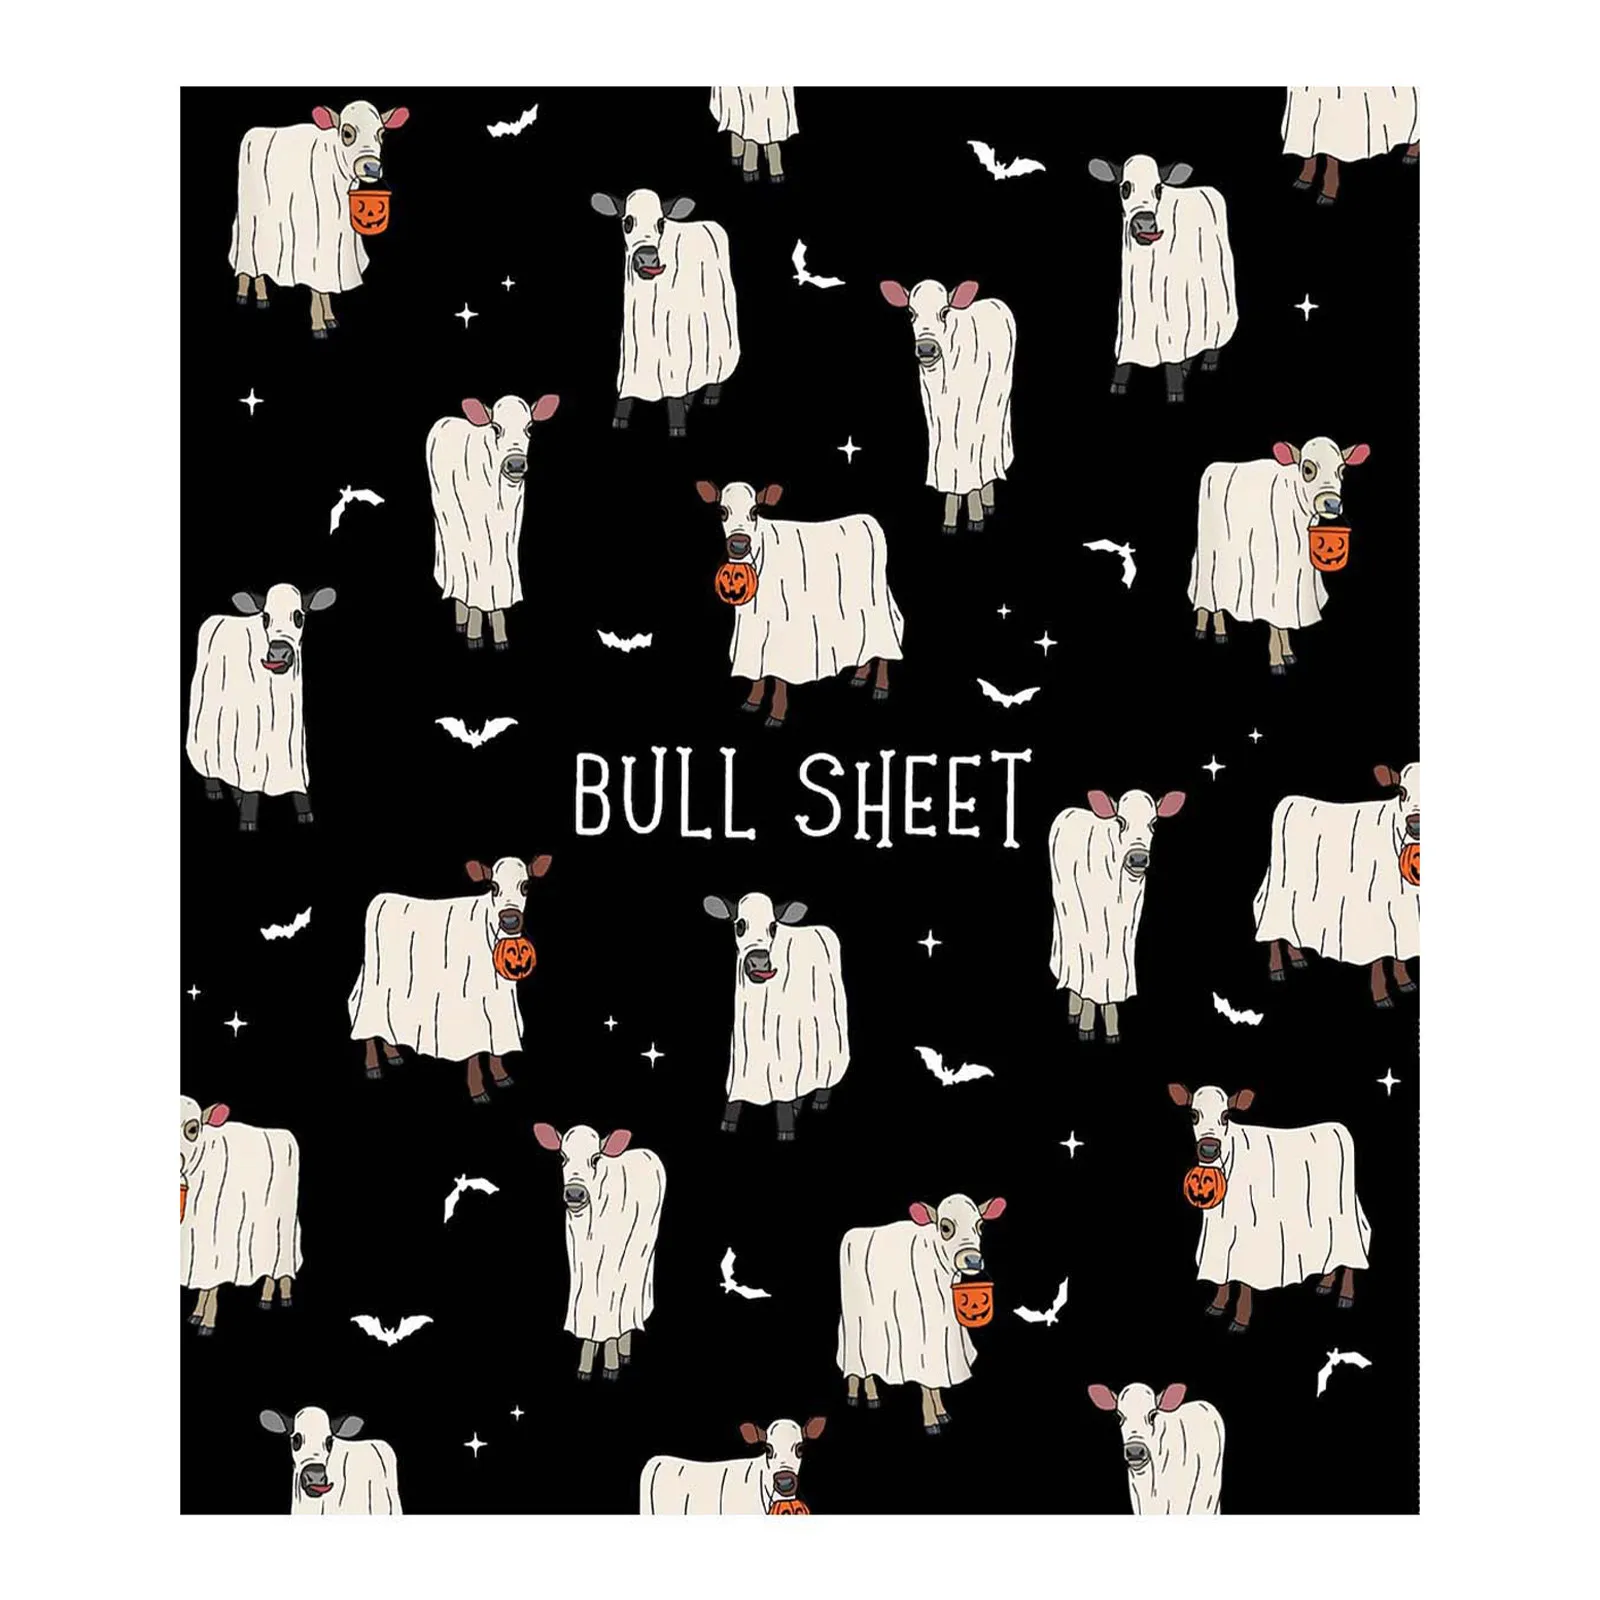 

Cow BULL SHEET Blanket 480GSM Blankets For Couch Sofa Bed Soft Lightweight h Cozy And Throws Toddlers Kids Girls Boys